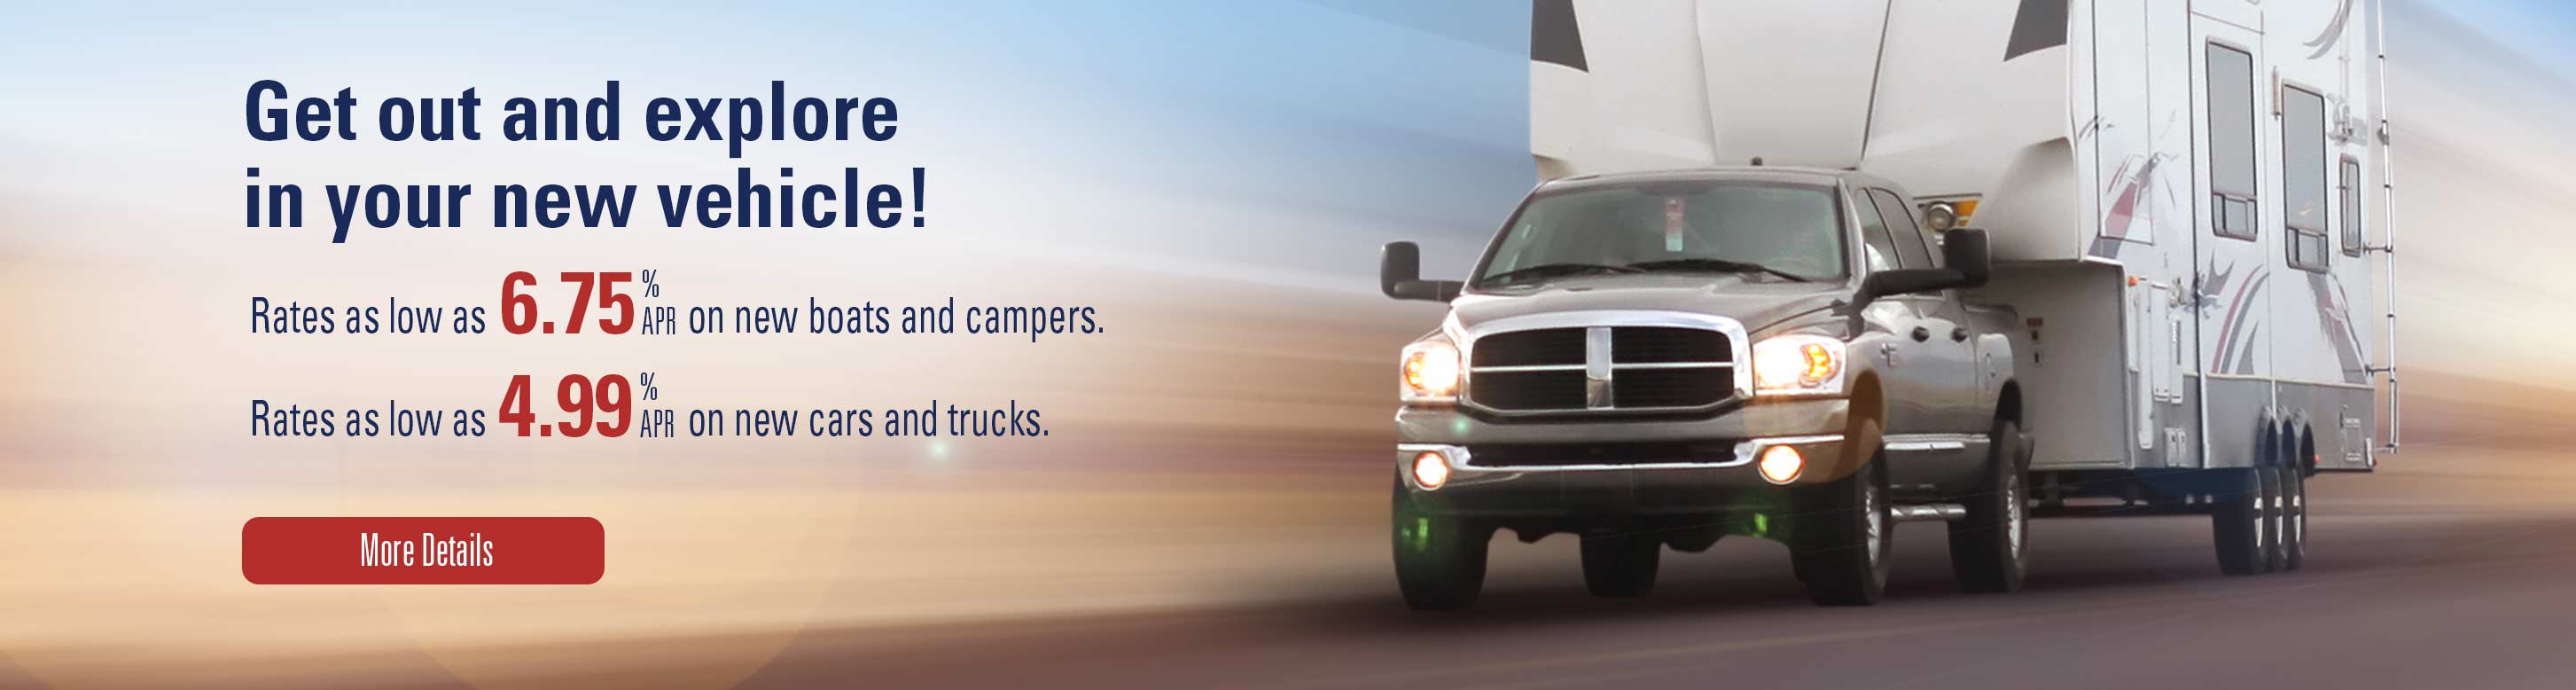 Get out an explore in your new vehicle! Rates as low as 6.75% apr on new boarts and campers. Rates as low as 4.99% apr on new cars and trucks. More Details.